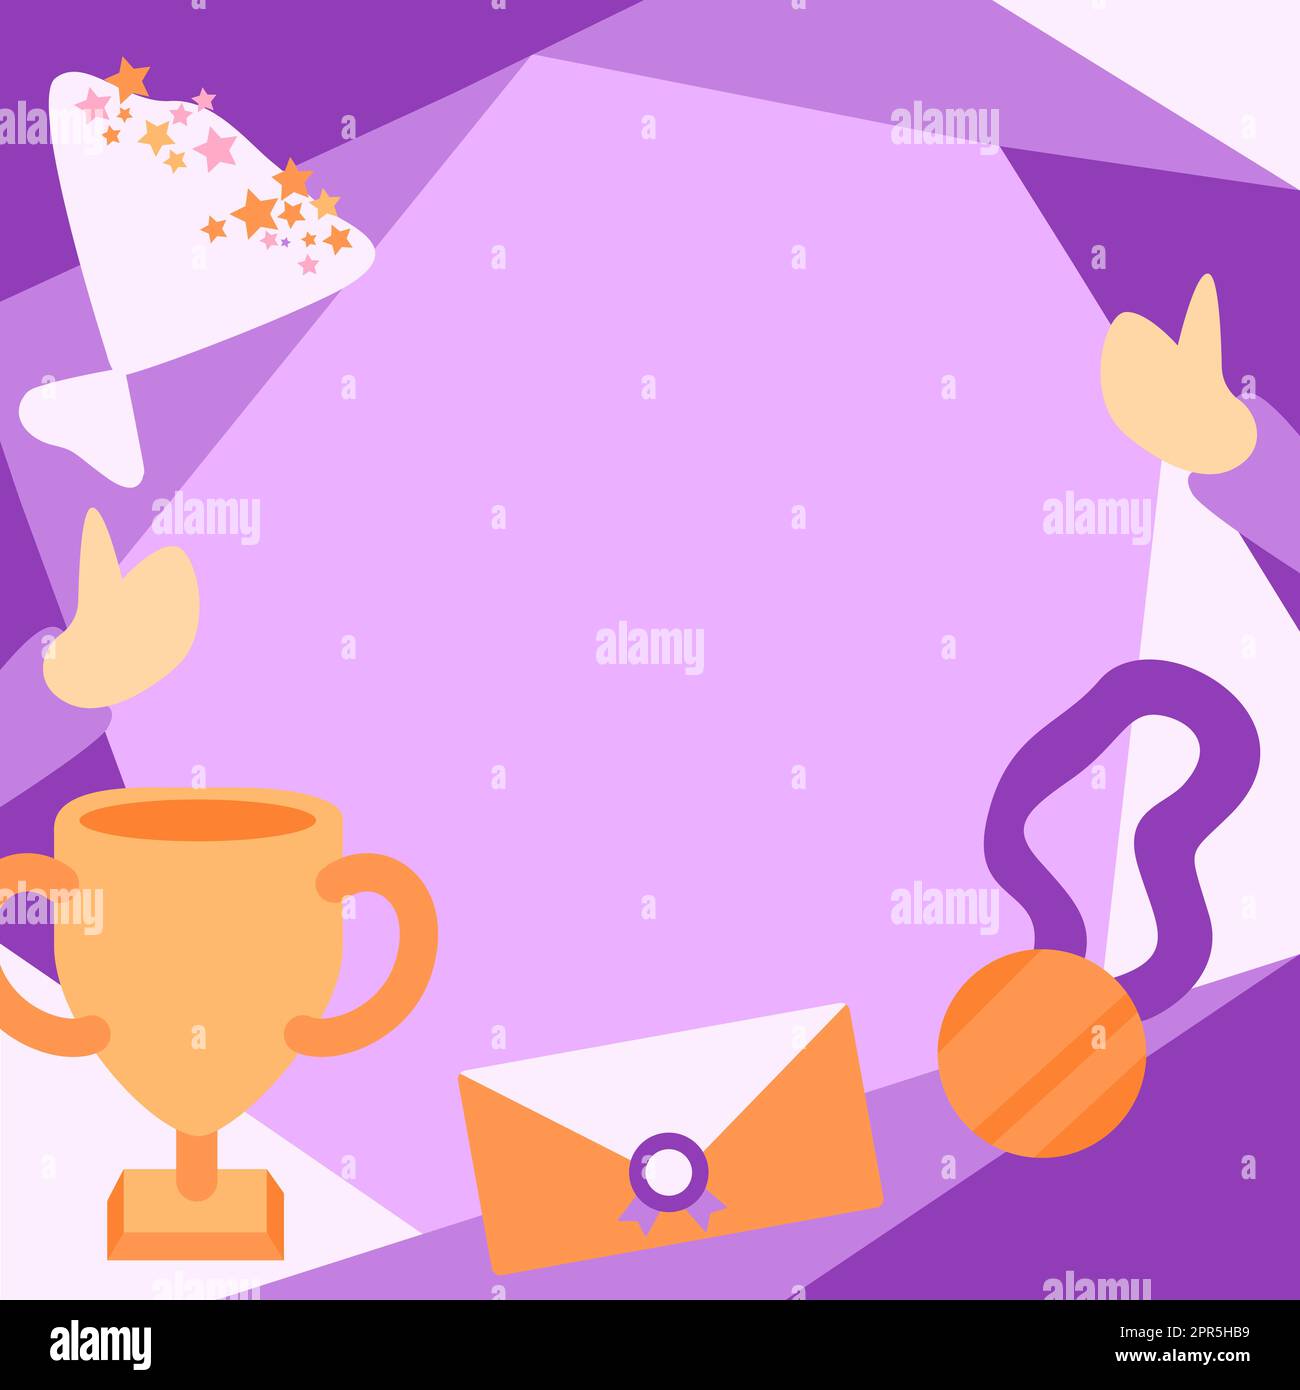 People Congratulating Success Presenting Earned Trophy Medals. Successful Teamwork Earning Prize For Combined Effort. Abstractly Presented Partnership Accomplishments. Stock Vector